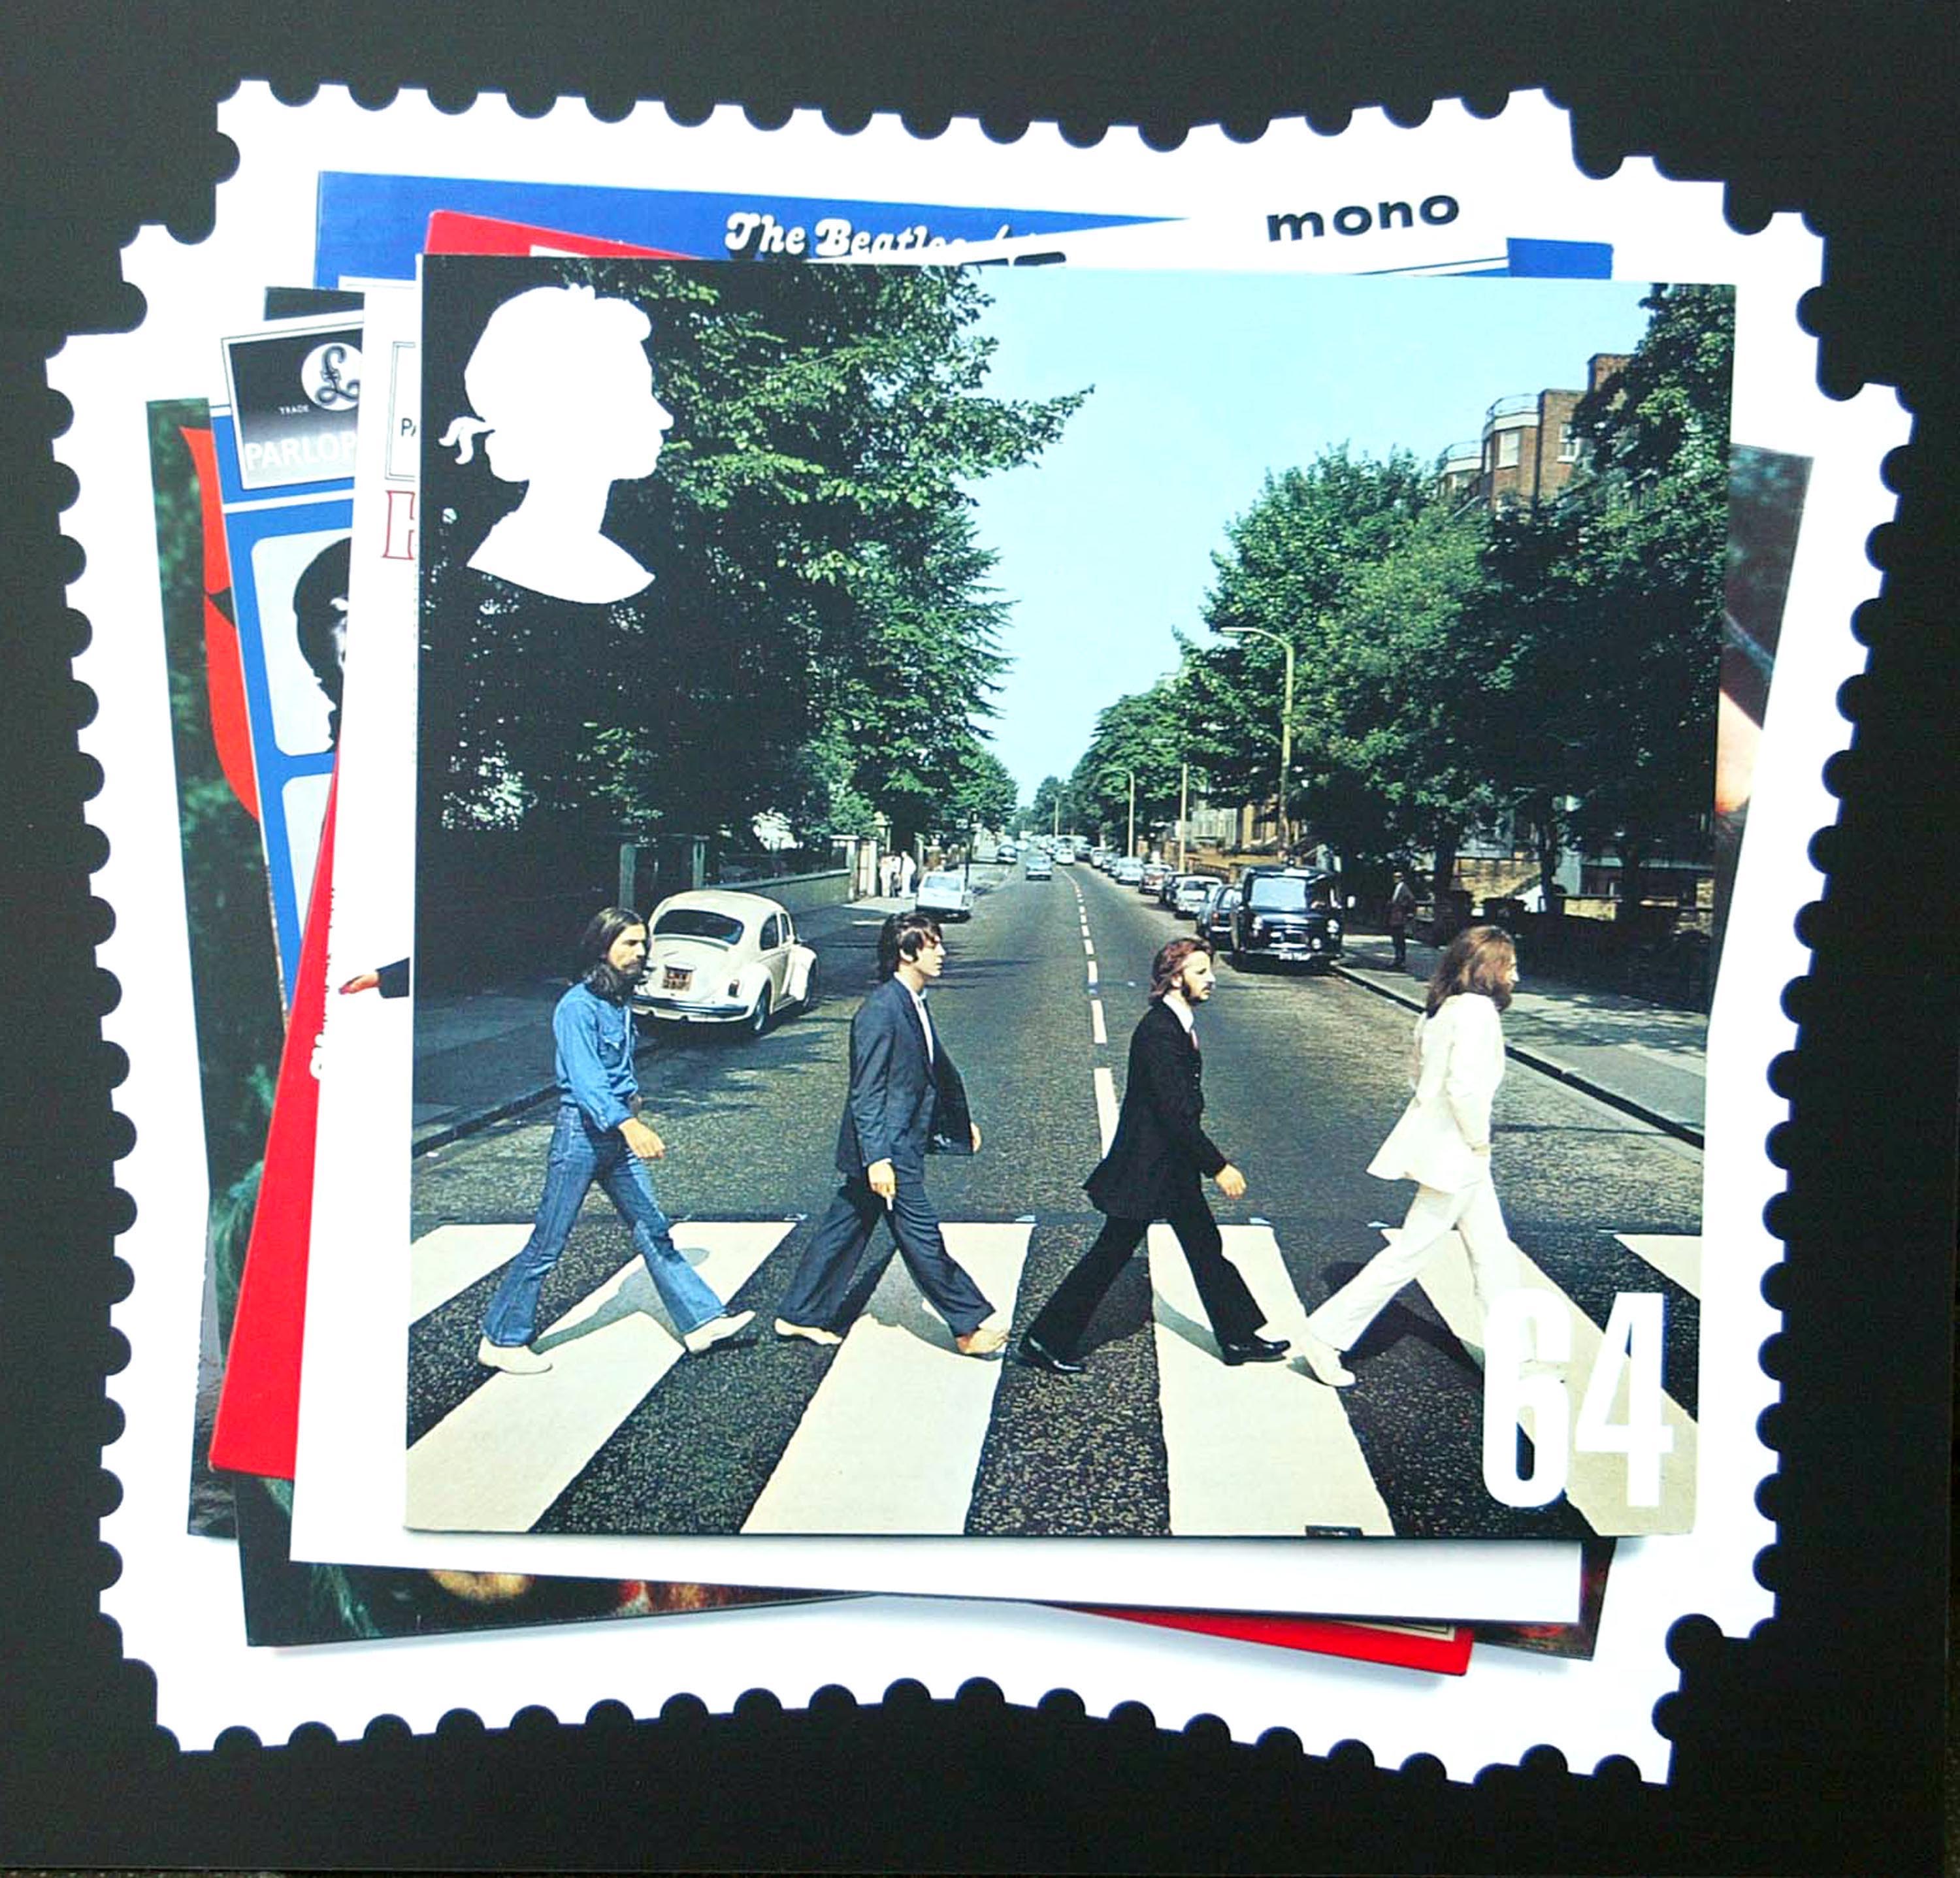 Royal stamps featuring the Abbey Road cover with The Beatles